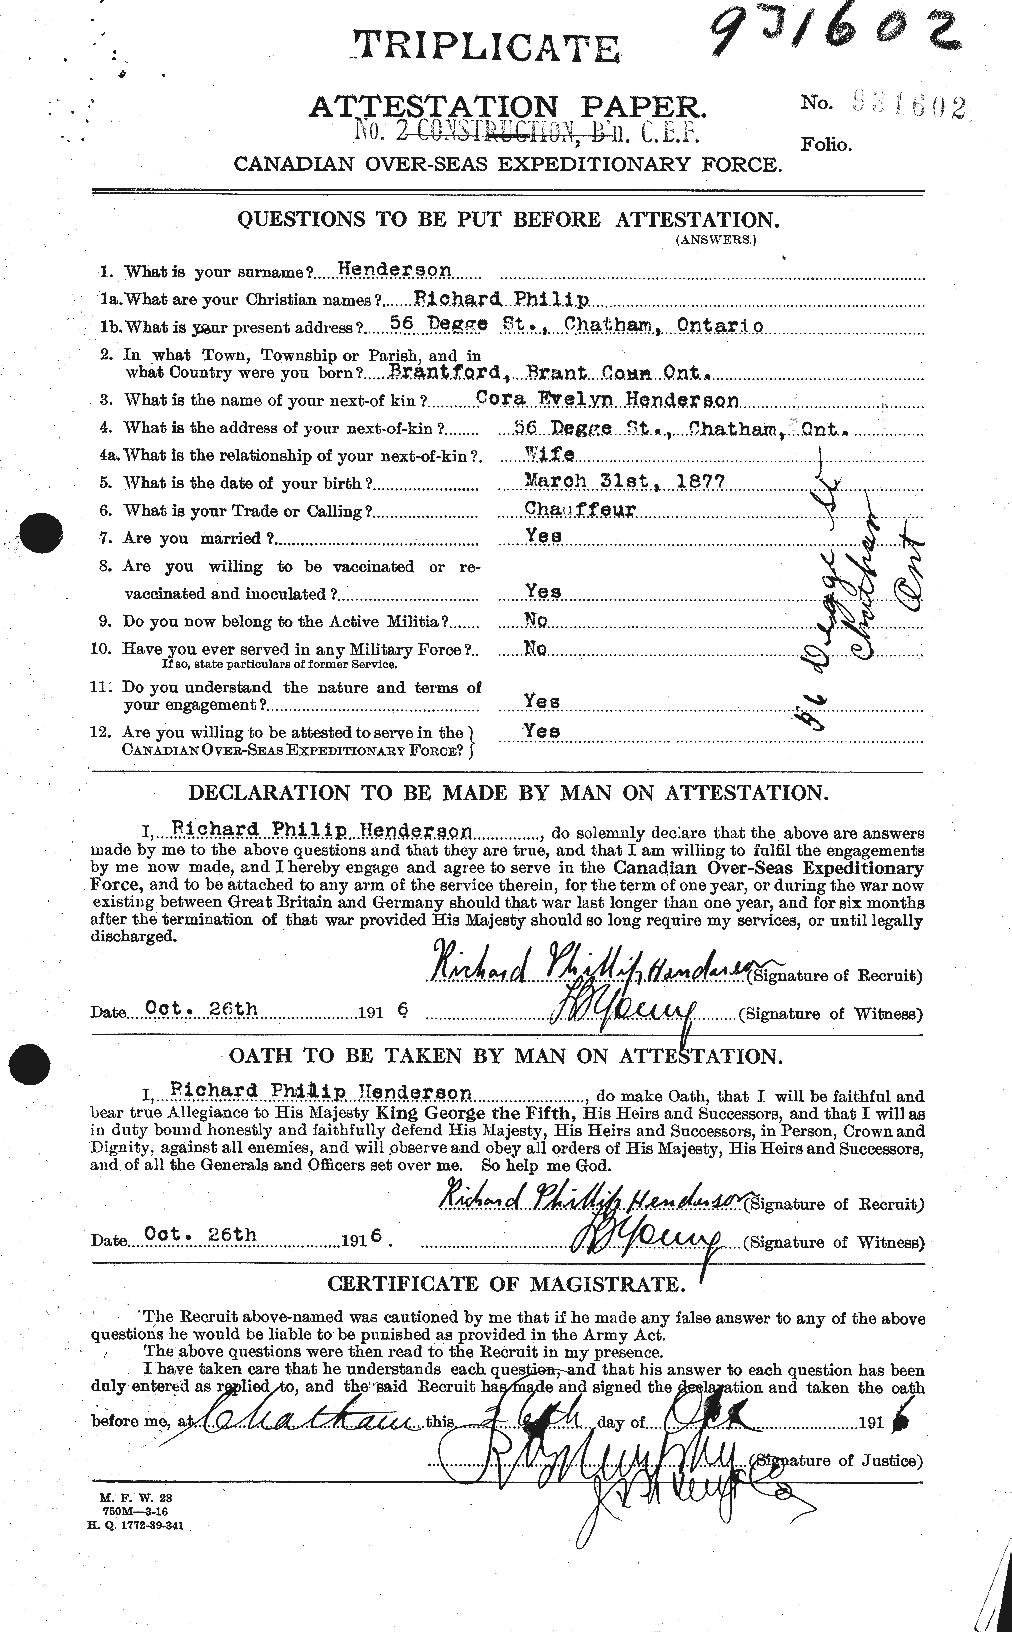 Personnel Records of the First World War - CEF 387320a